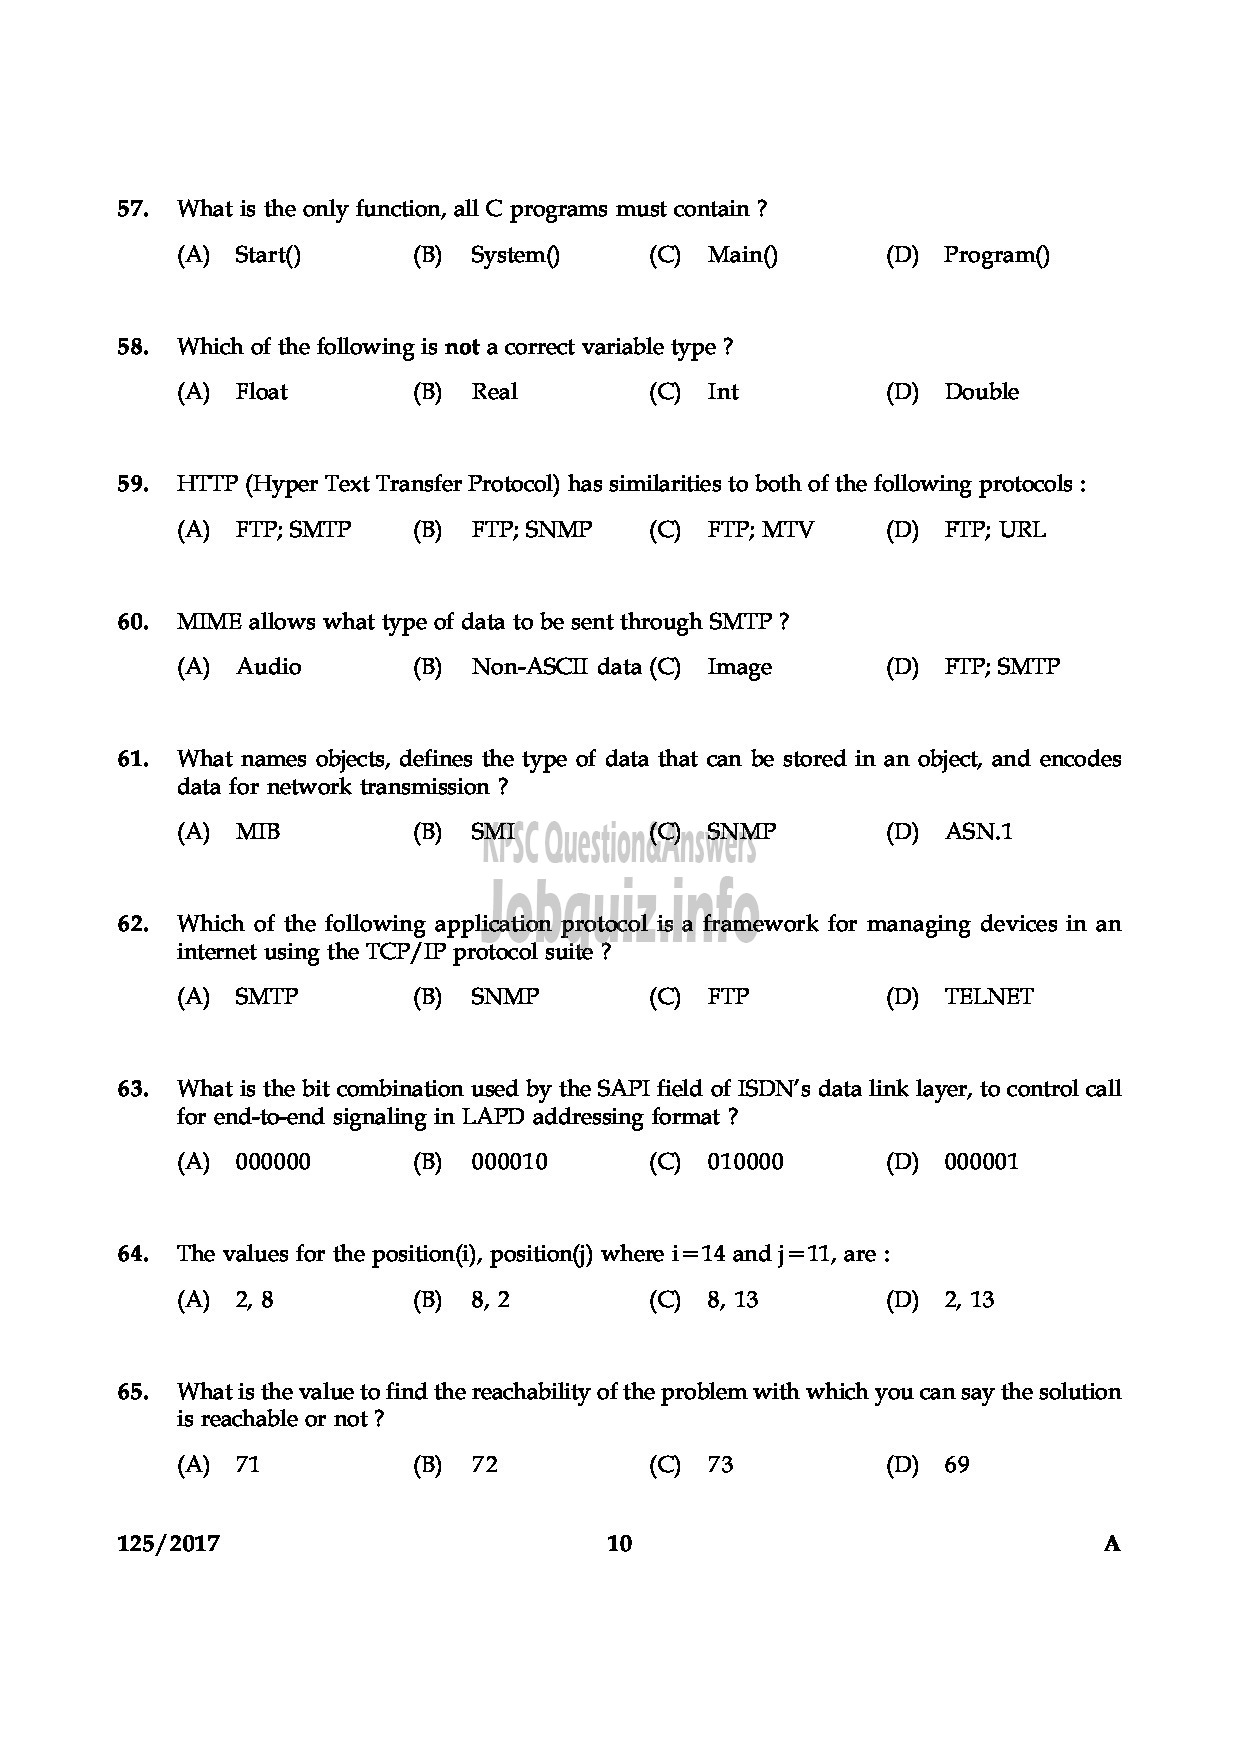 Kerala PSC Question Paper - LECTURER IN COMPUTER APPLICATION COLLEGIATE EDUCATION-10